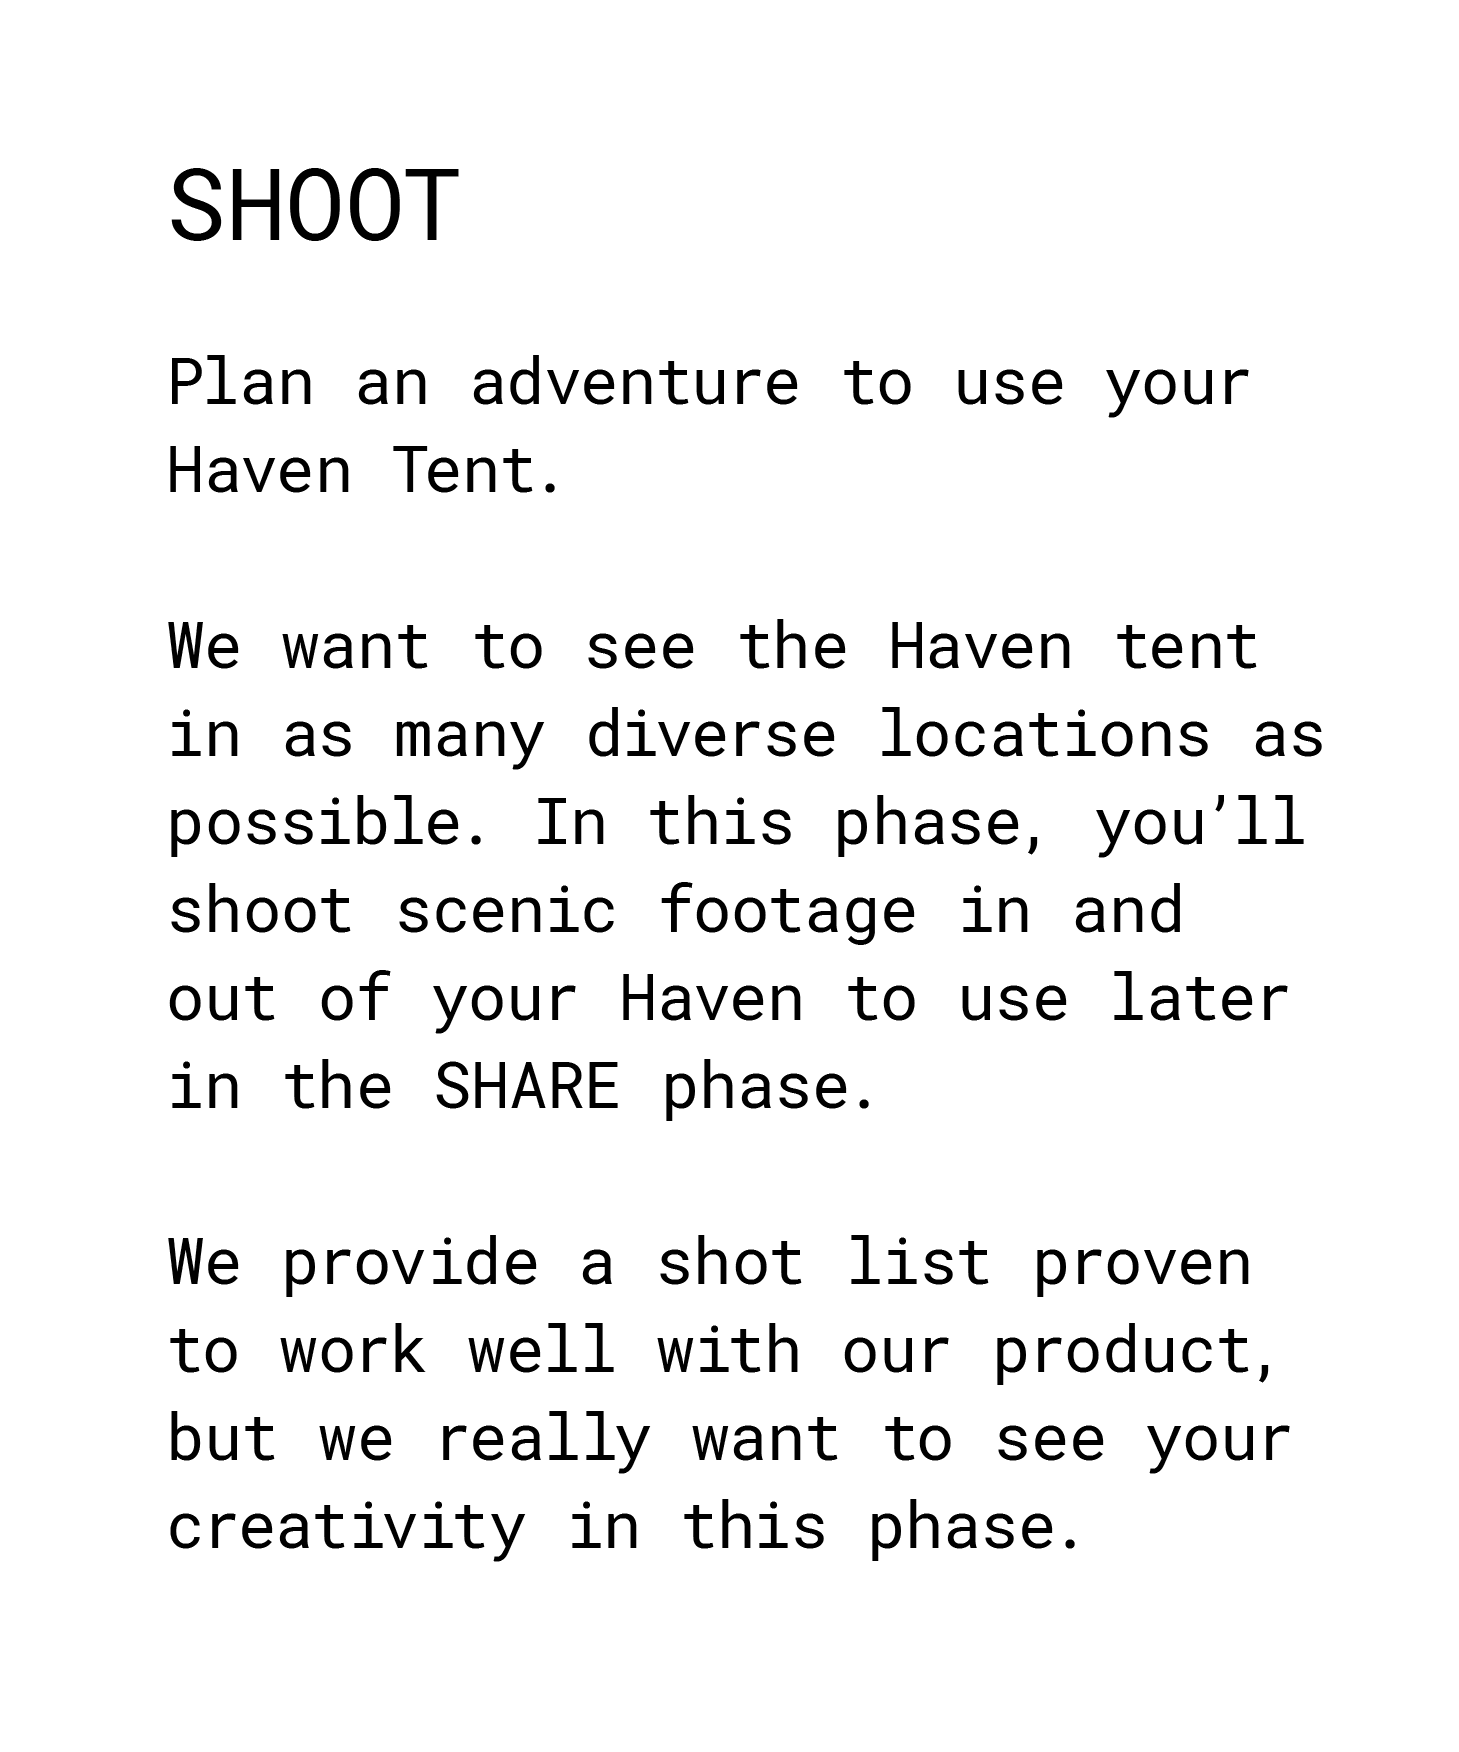 Shoot. Plan an adventure to use your Haven Tent. We want to see the Haven tent in as many diverse locations as possible. In this phase, you’ll shoot scenic footage in and out of your Haven to use later in the SHARE phase. We provide a shot list proven to work well with our product, but we really want to see your creativity in this phase. 